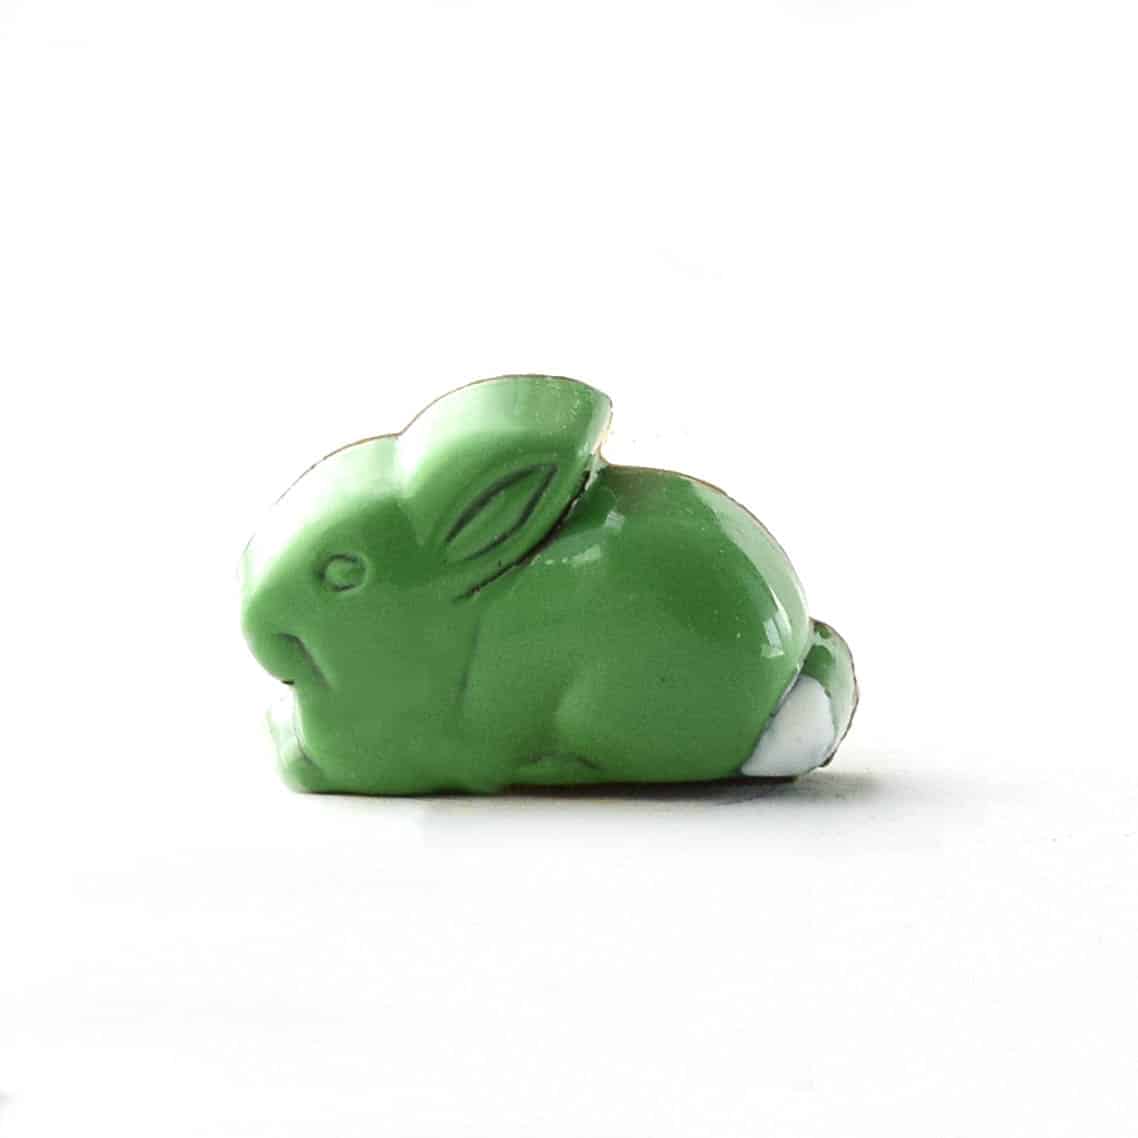 Side view of a spring green, rabbit-shaped gourmet chocolate truffle filled with handcrafted marshmallow